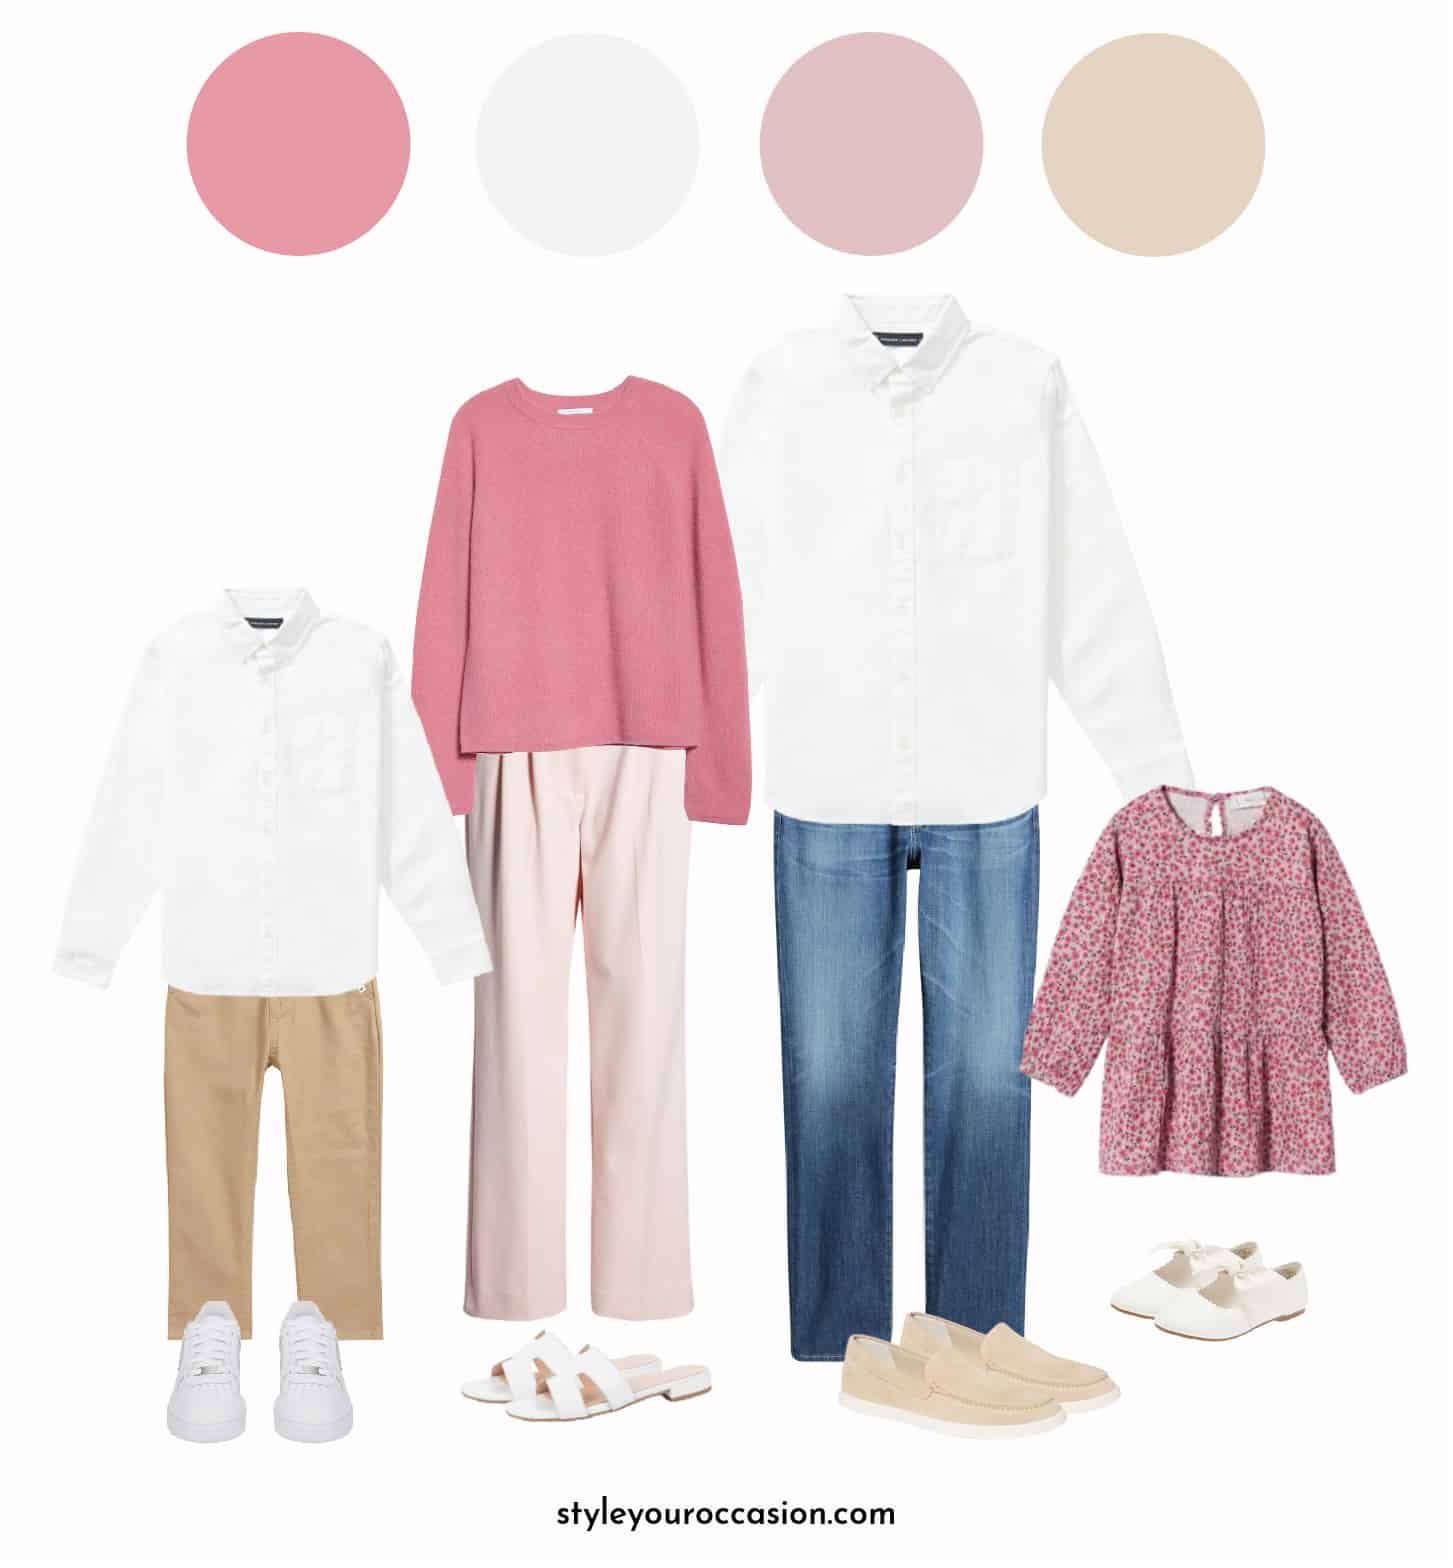 mood board of a family photo outfit guide with shades of pink and neutrals